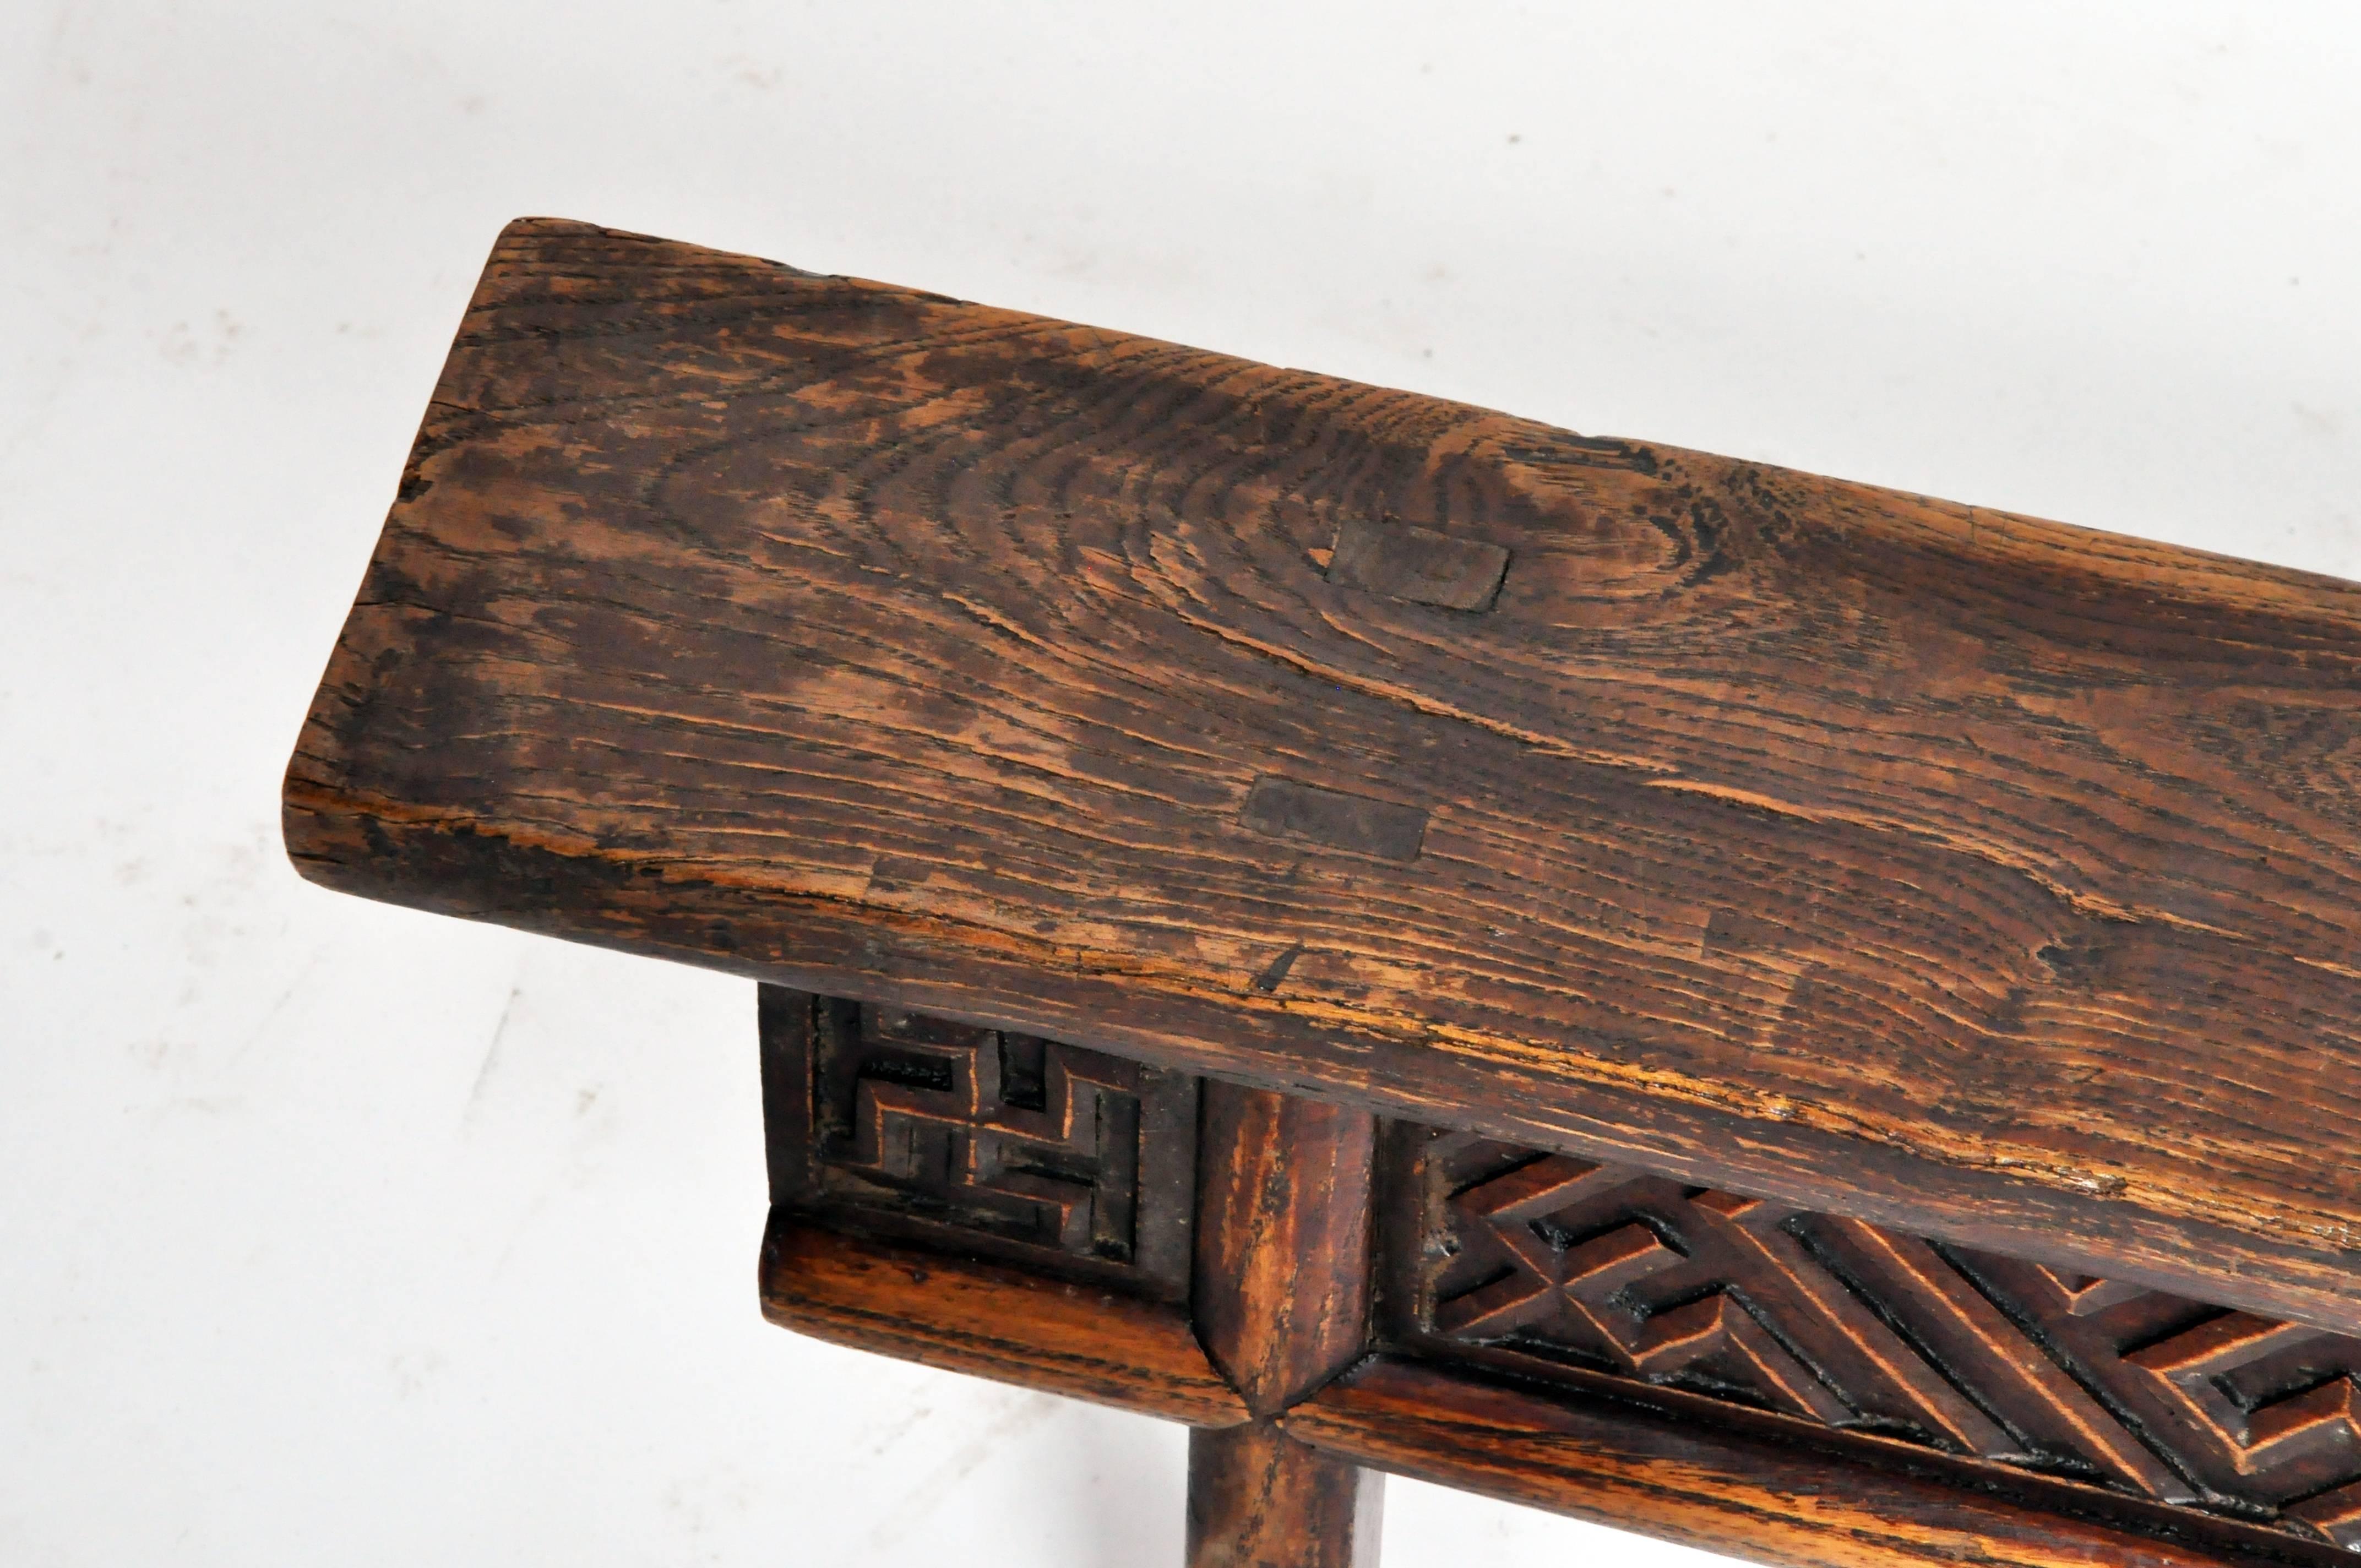 Elm Qing Dynasty Cart Stool with Decorative Carving